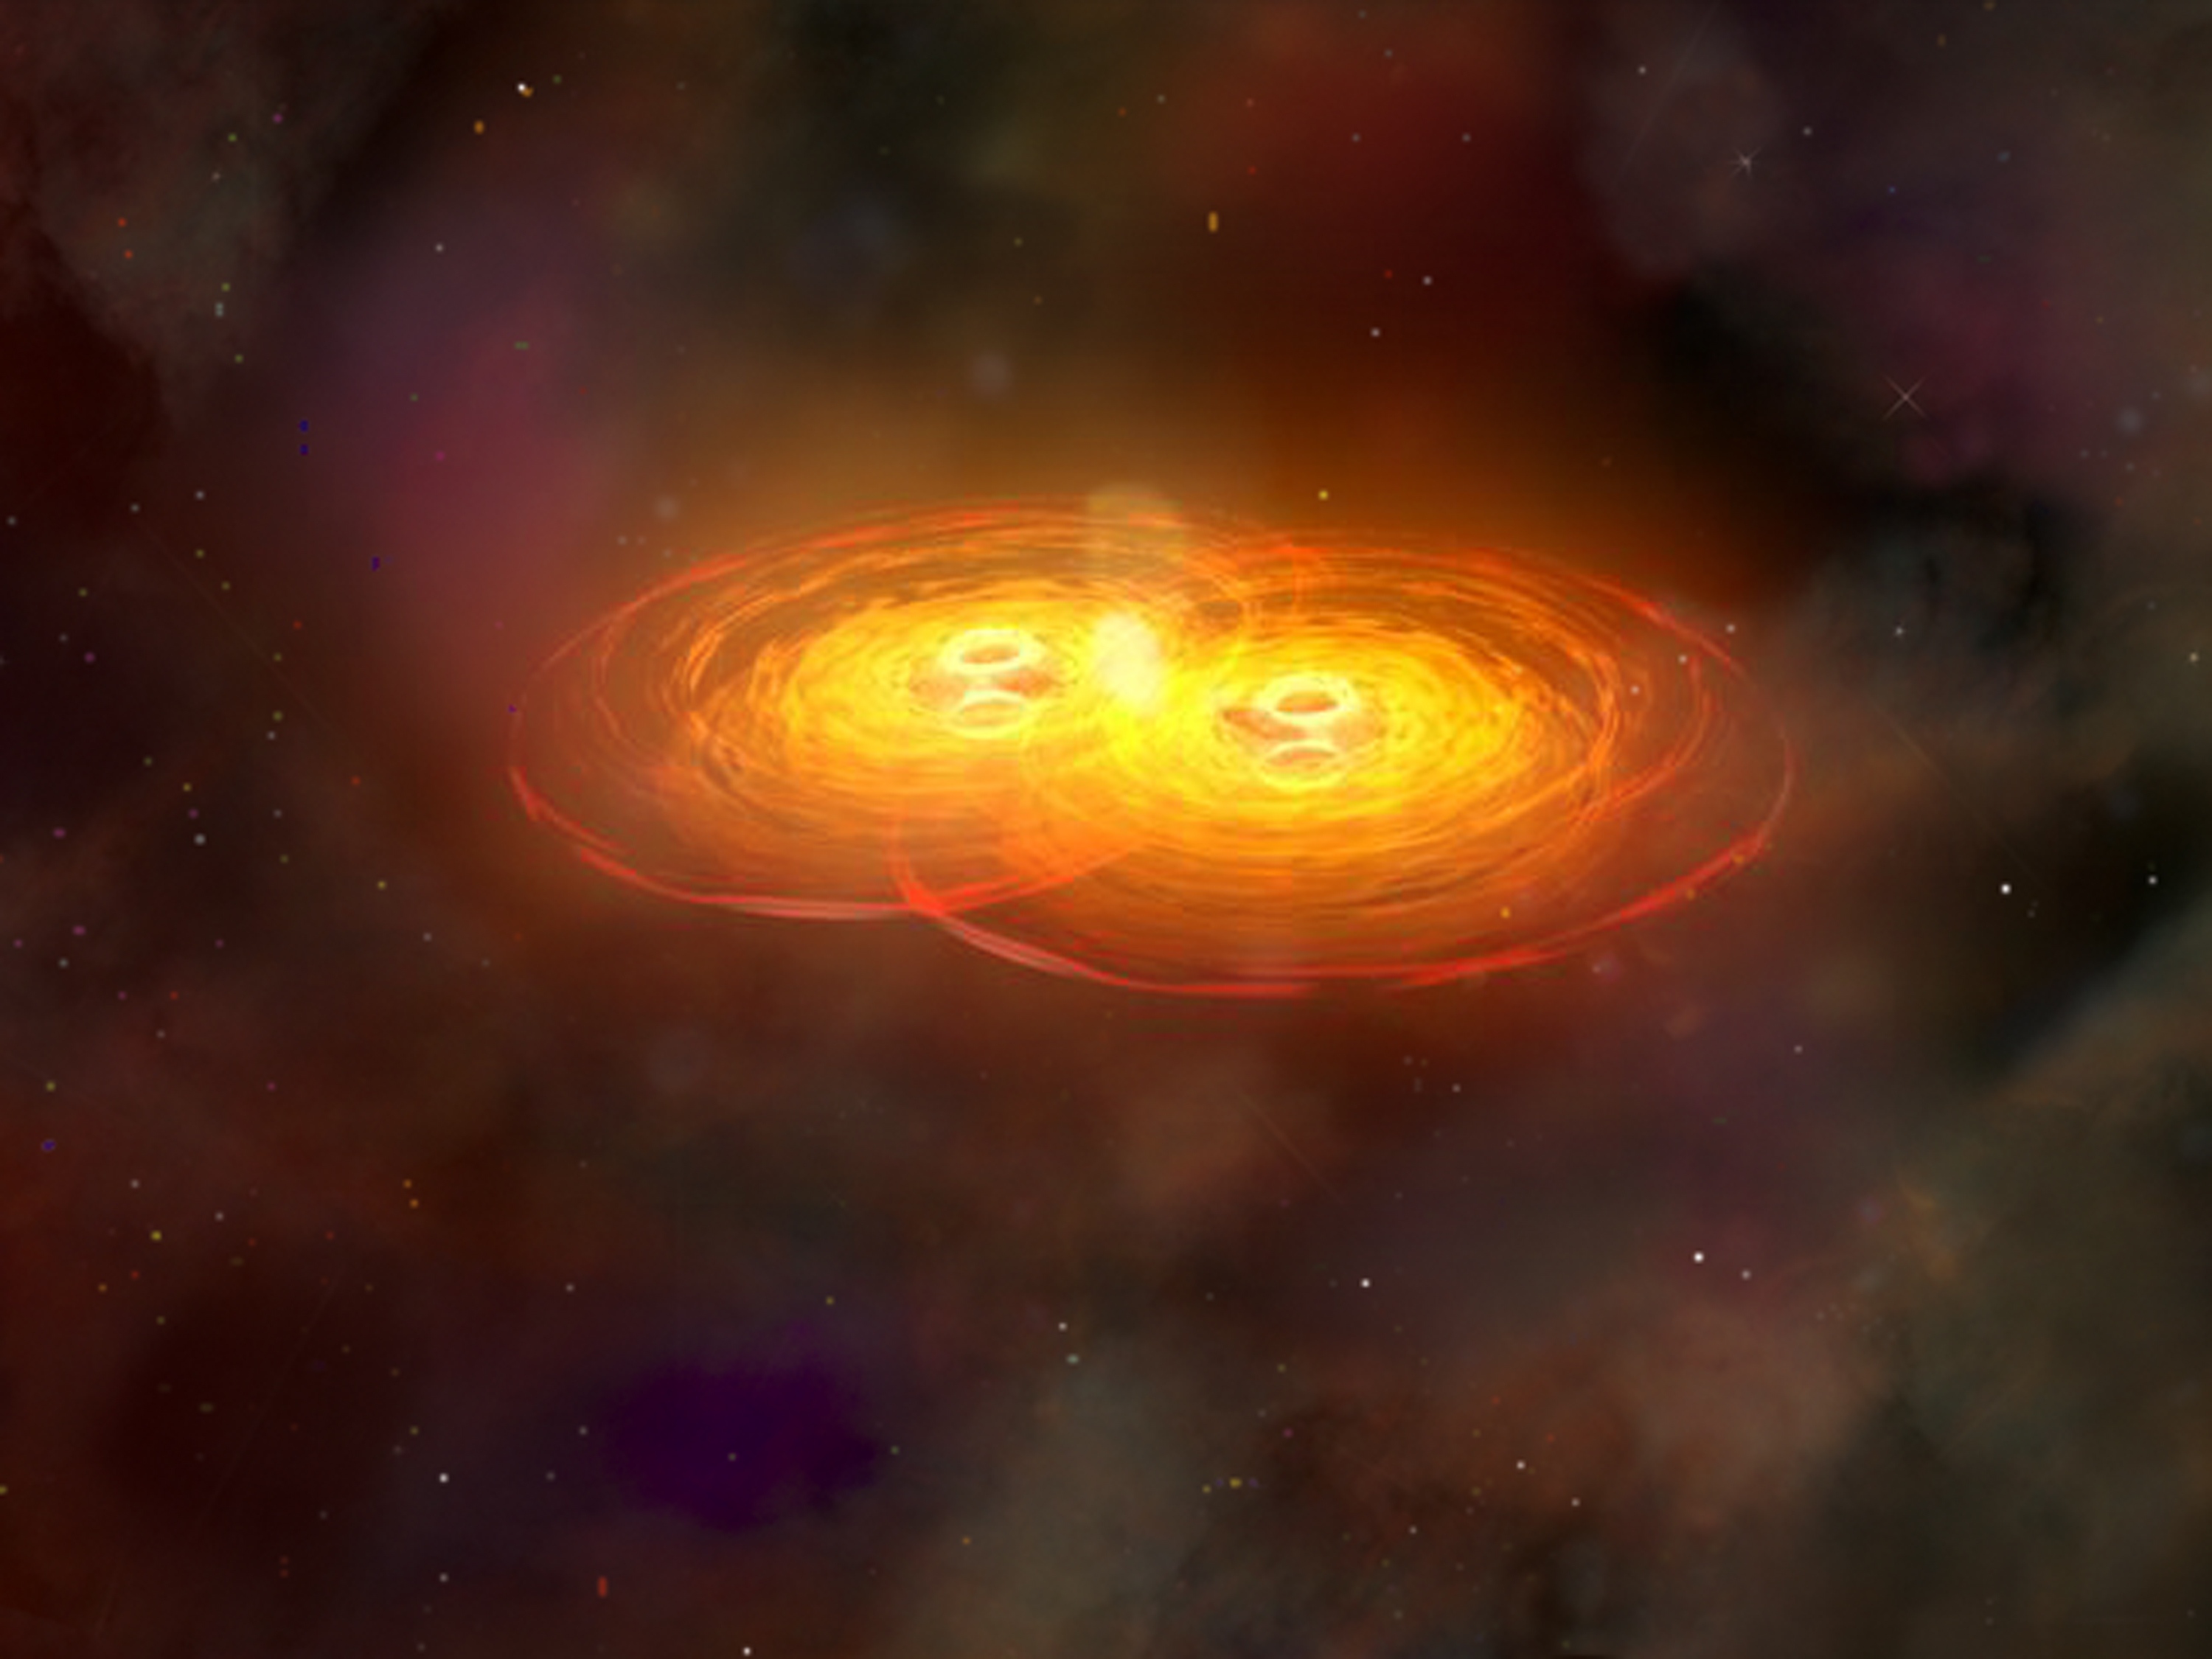 Image of two black holes merging together into one